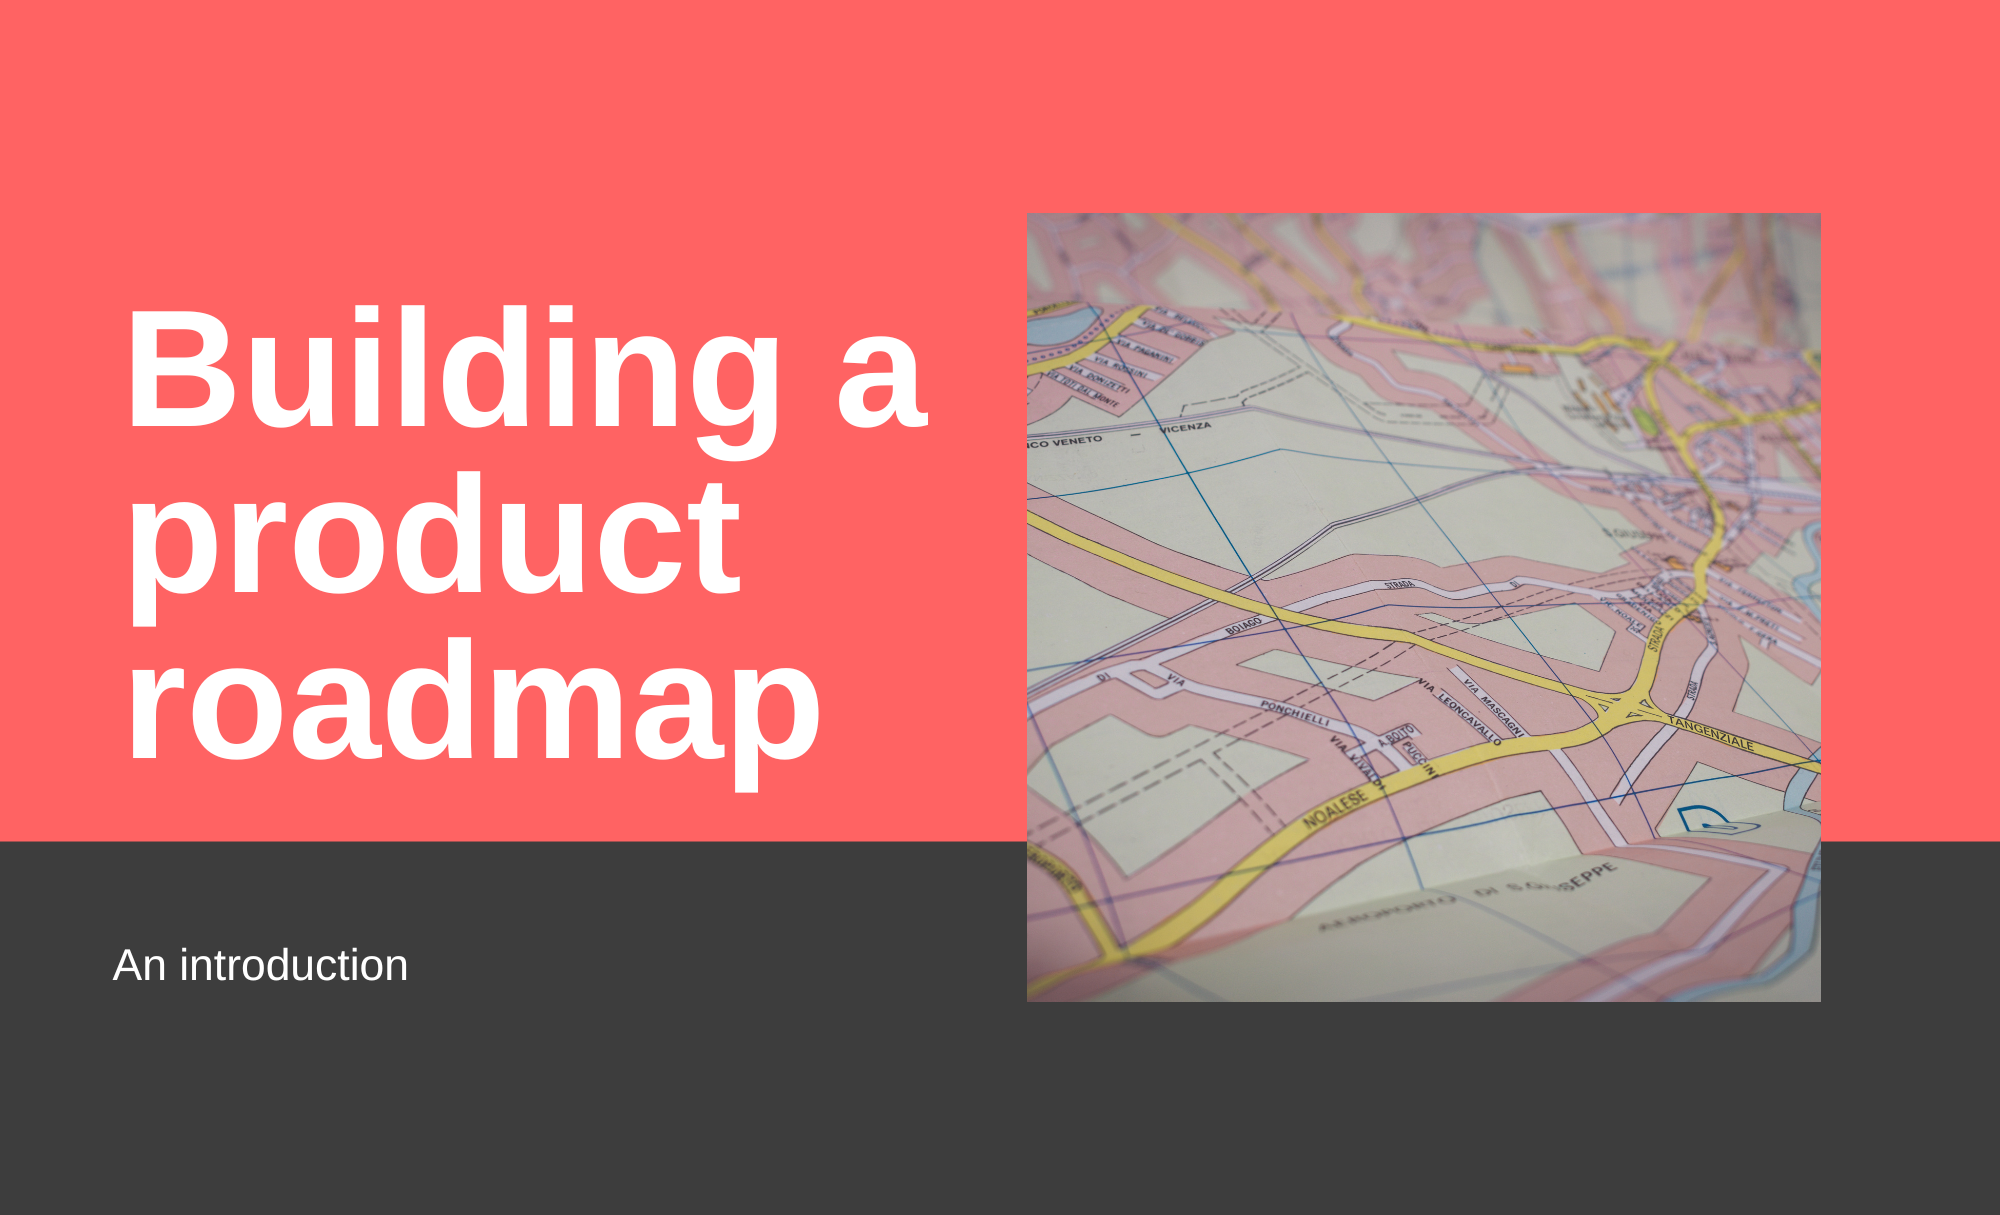 The basics of Building a Product Roadmap